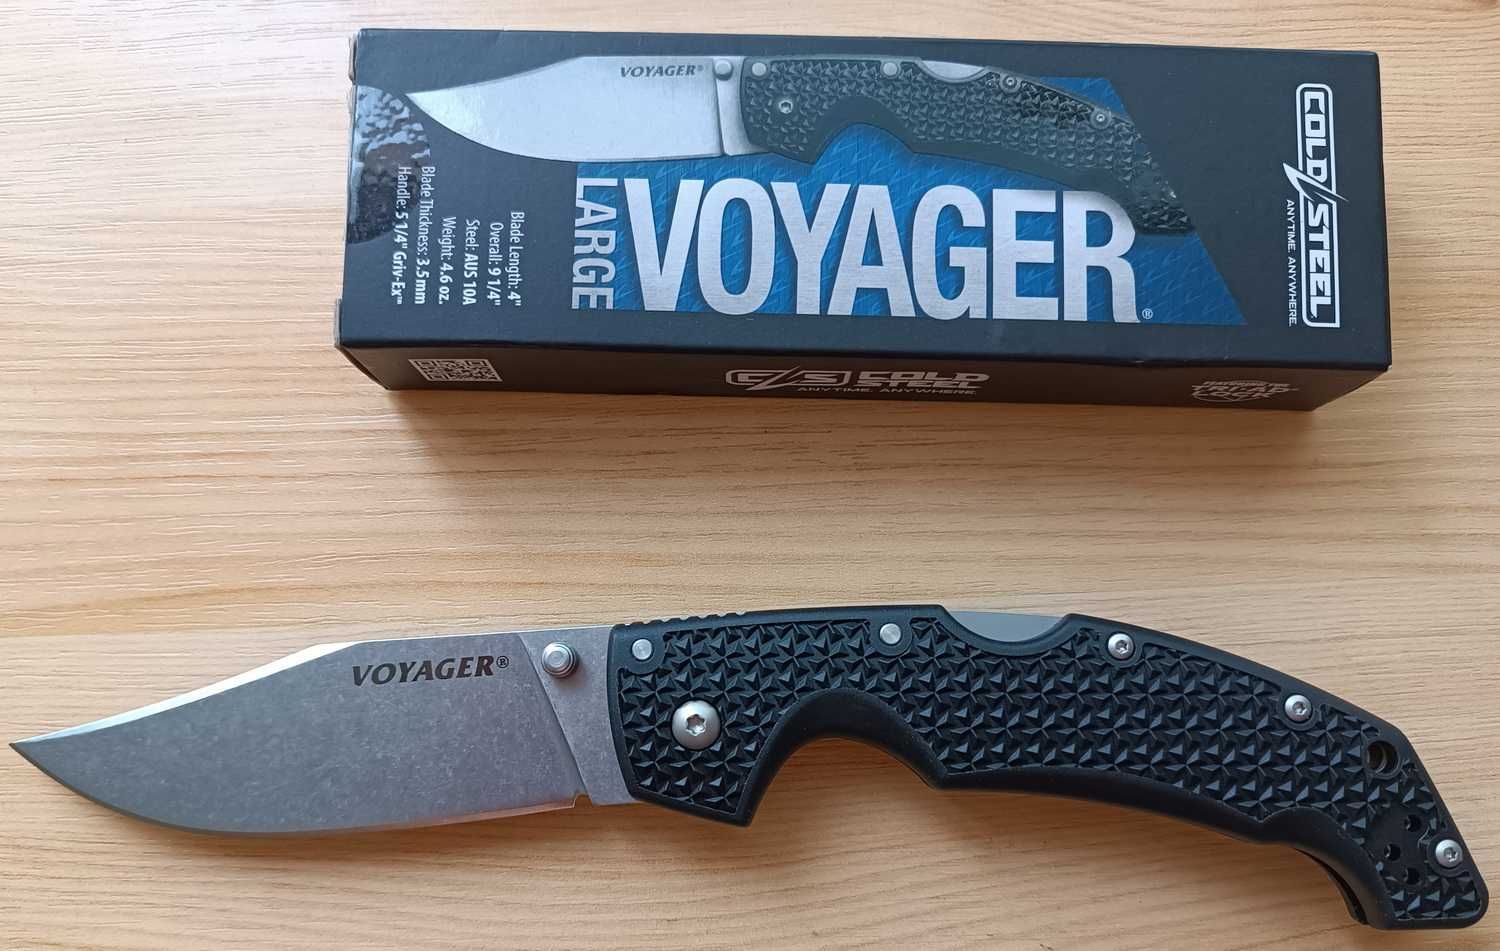 Cold steel voyager large clip point оригинал